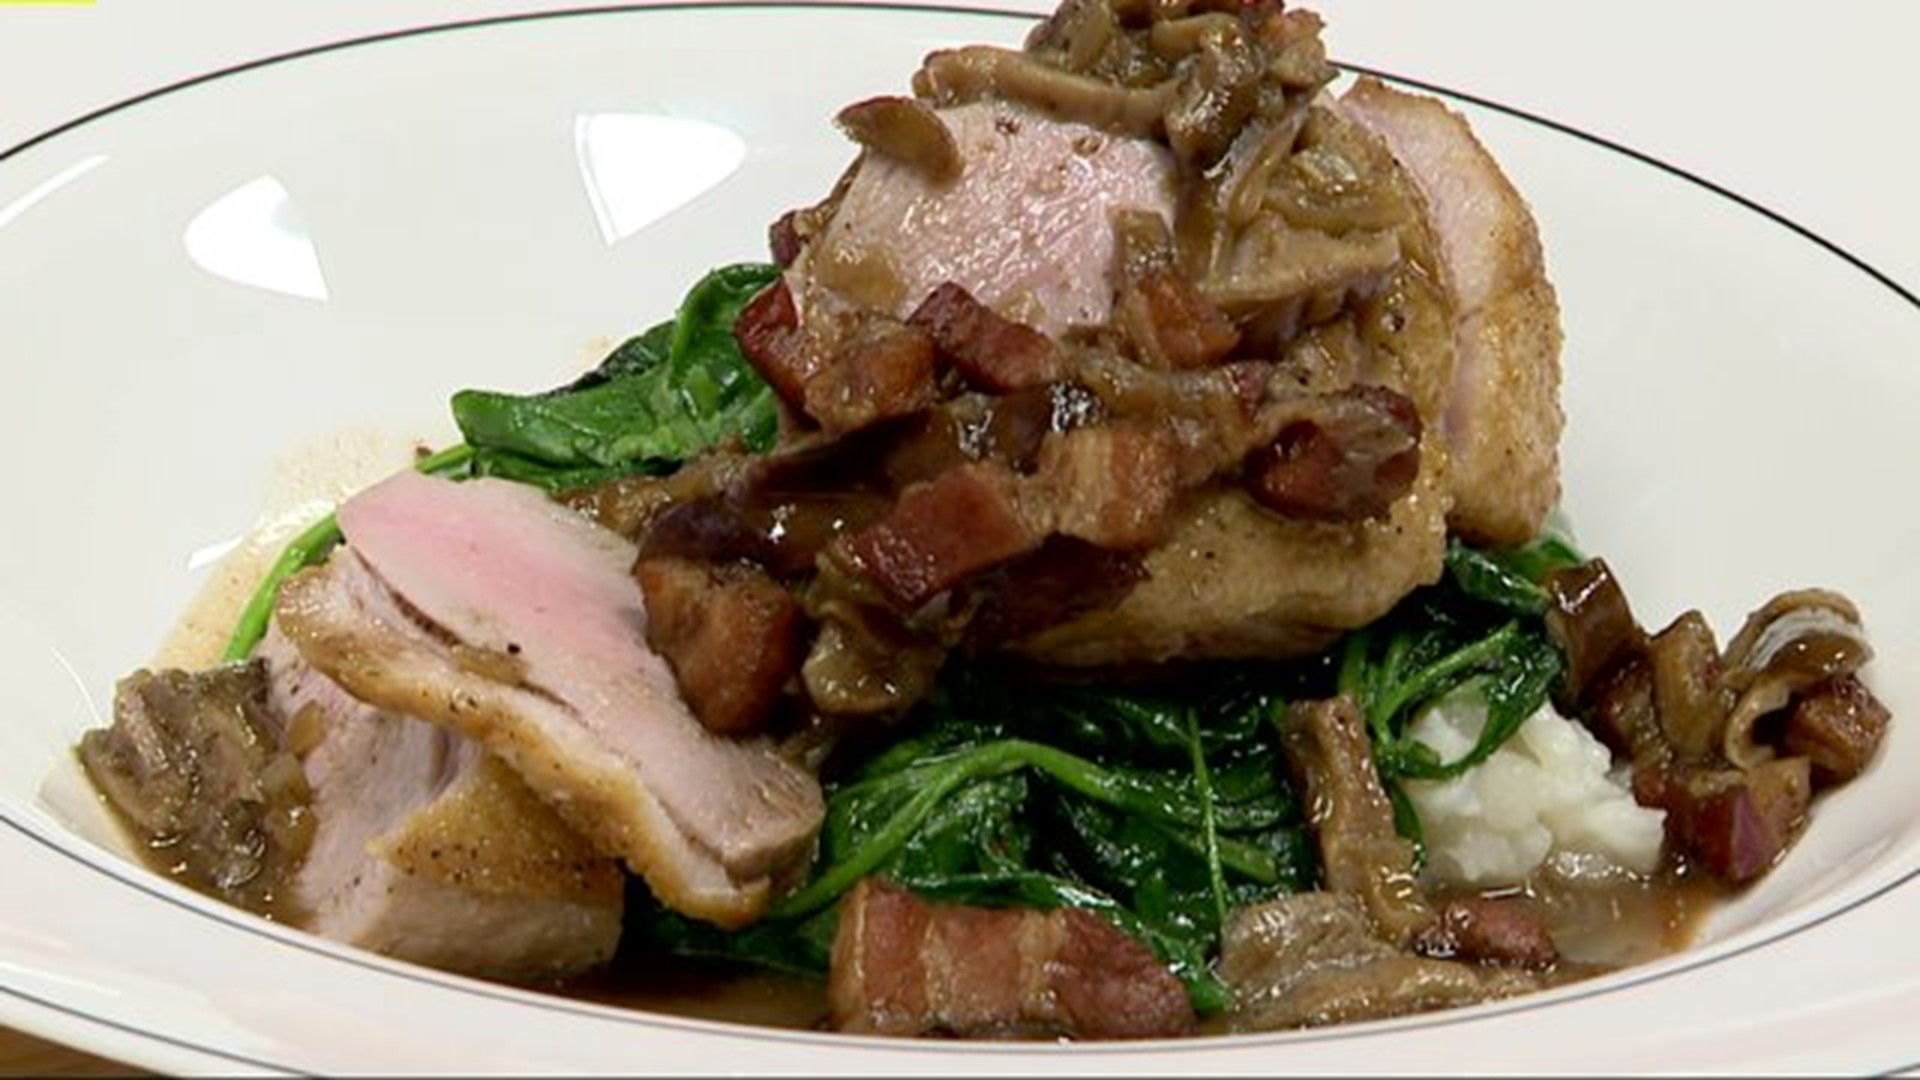 Seared Duck with Apple Smoked Bacon and Shiitakes over "Power Greens"